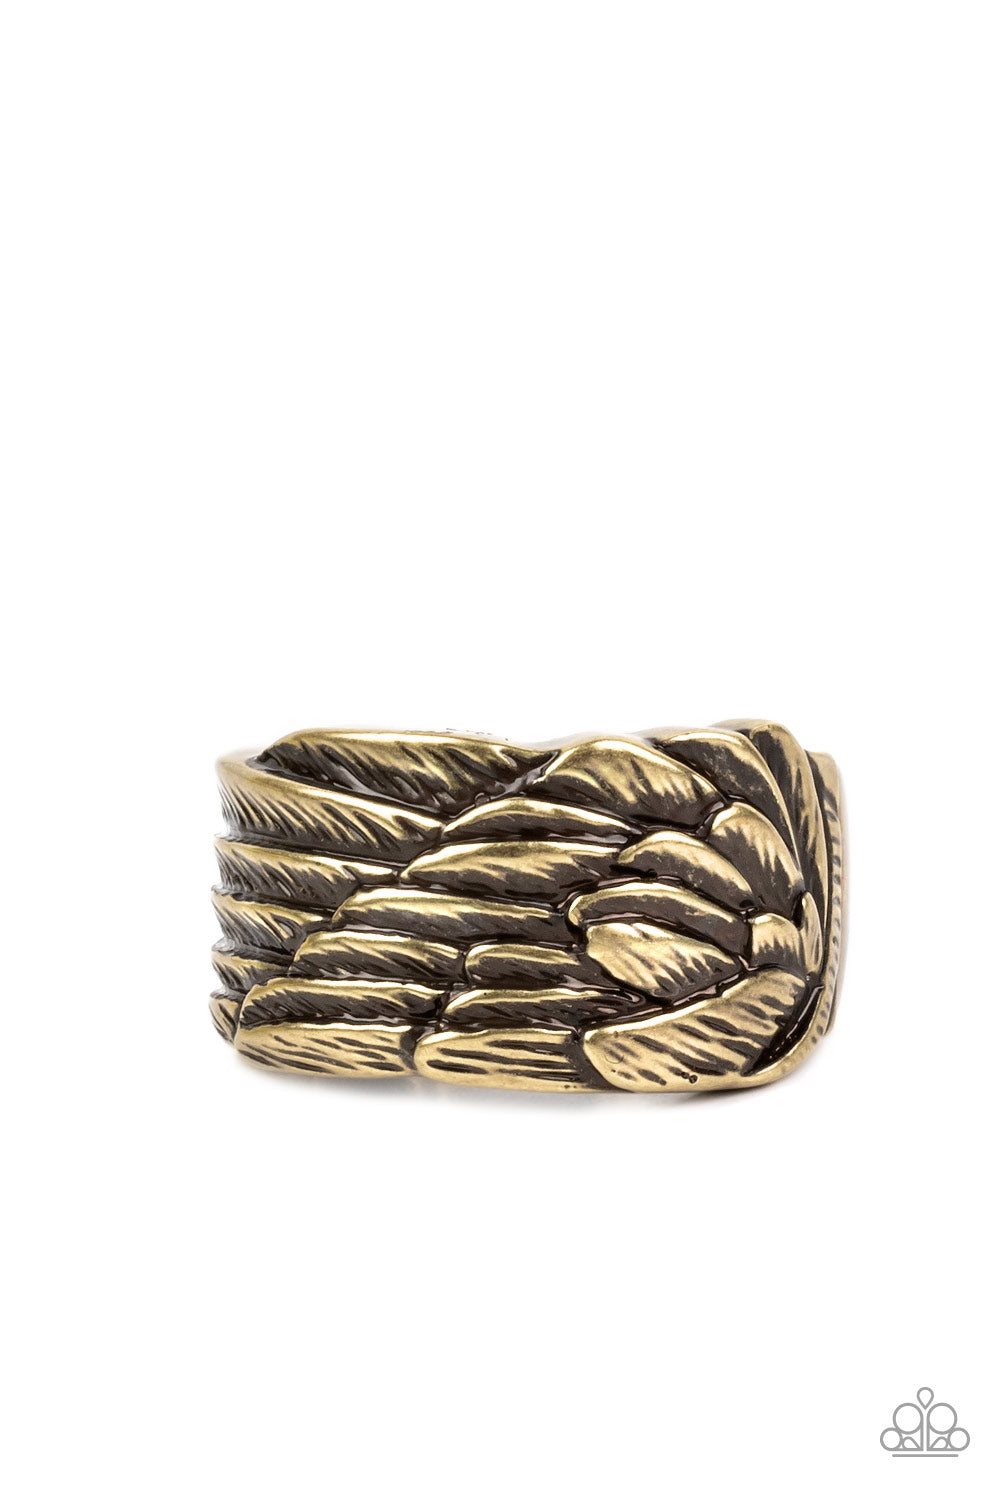 Fossil Fuel - brass - Paparazzi MENS ring